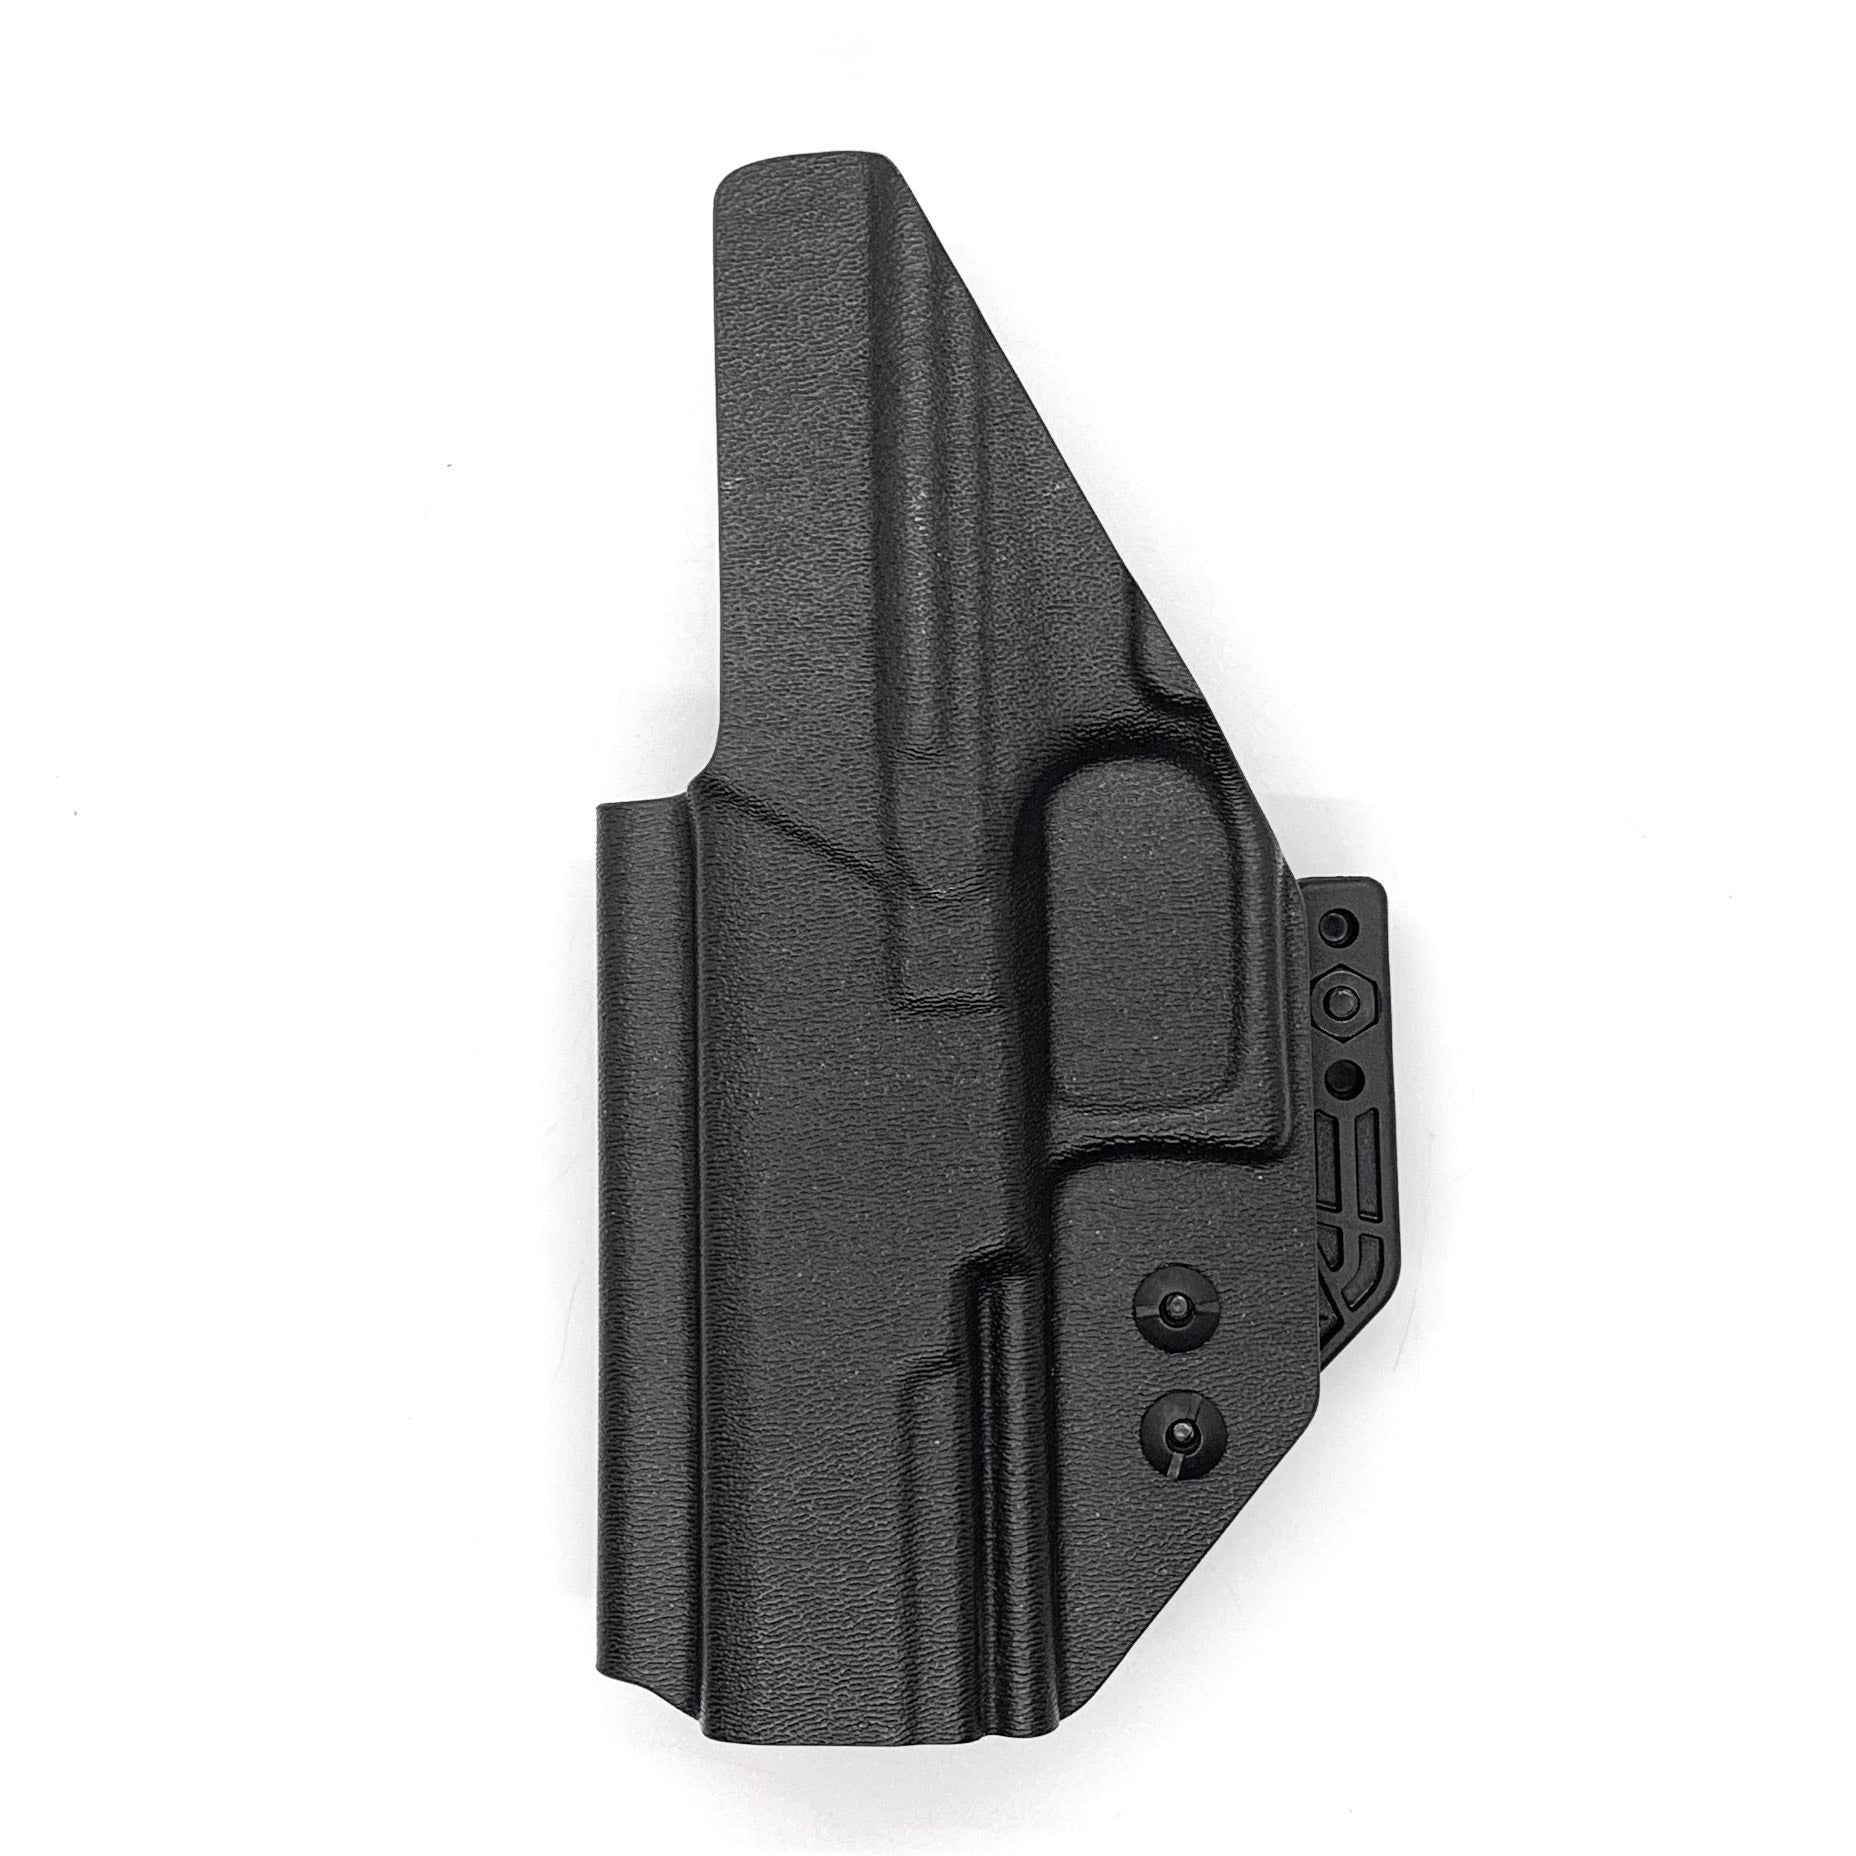 Inside Waistband IWB Holster designed to fit the Walther PDP Full Size 4.5" pistol. Holster profile is cut to allow red dot sights to be mounted on the pistol.  This holster will fit the Full Size 4.5", Full Size 4" & Compact. Full sweat guard, adjustable retention and open muzzle for threaded barrels and compensators.